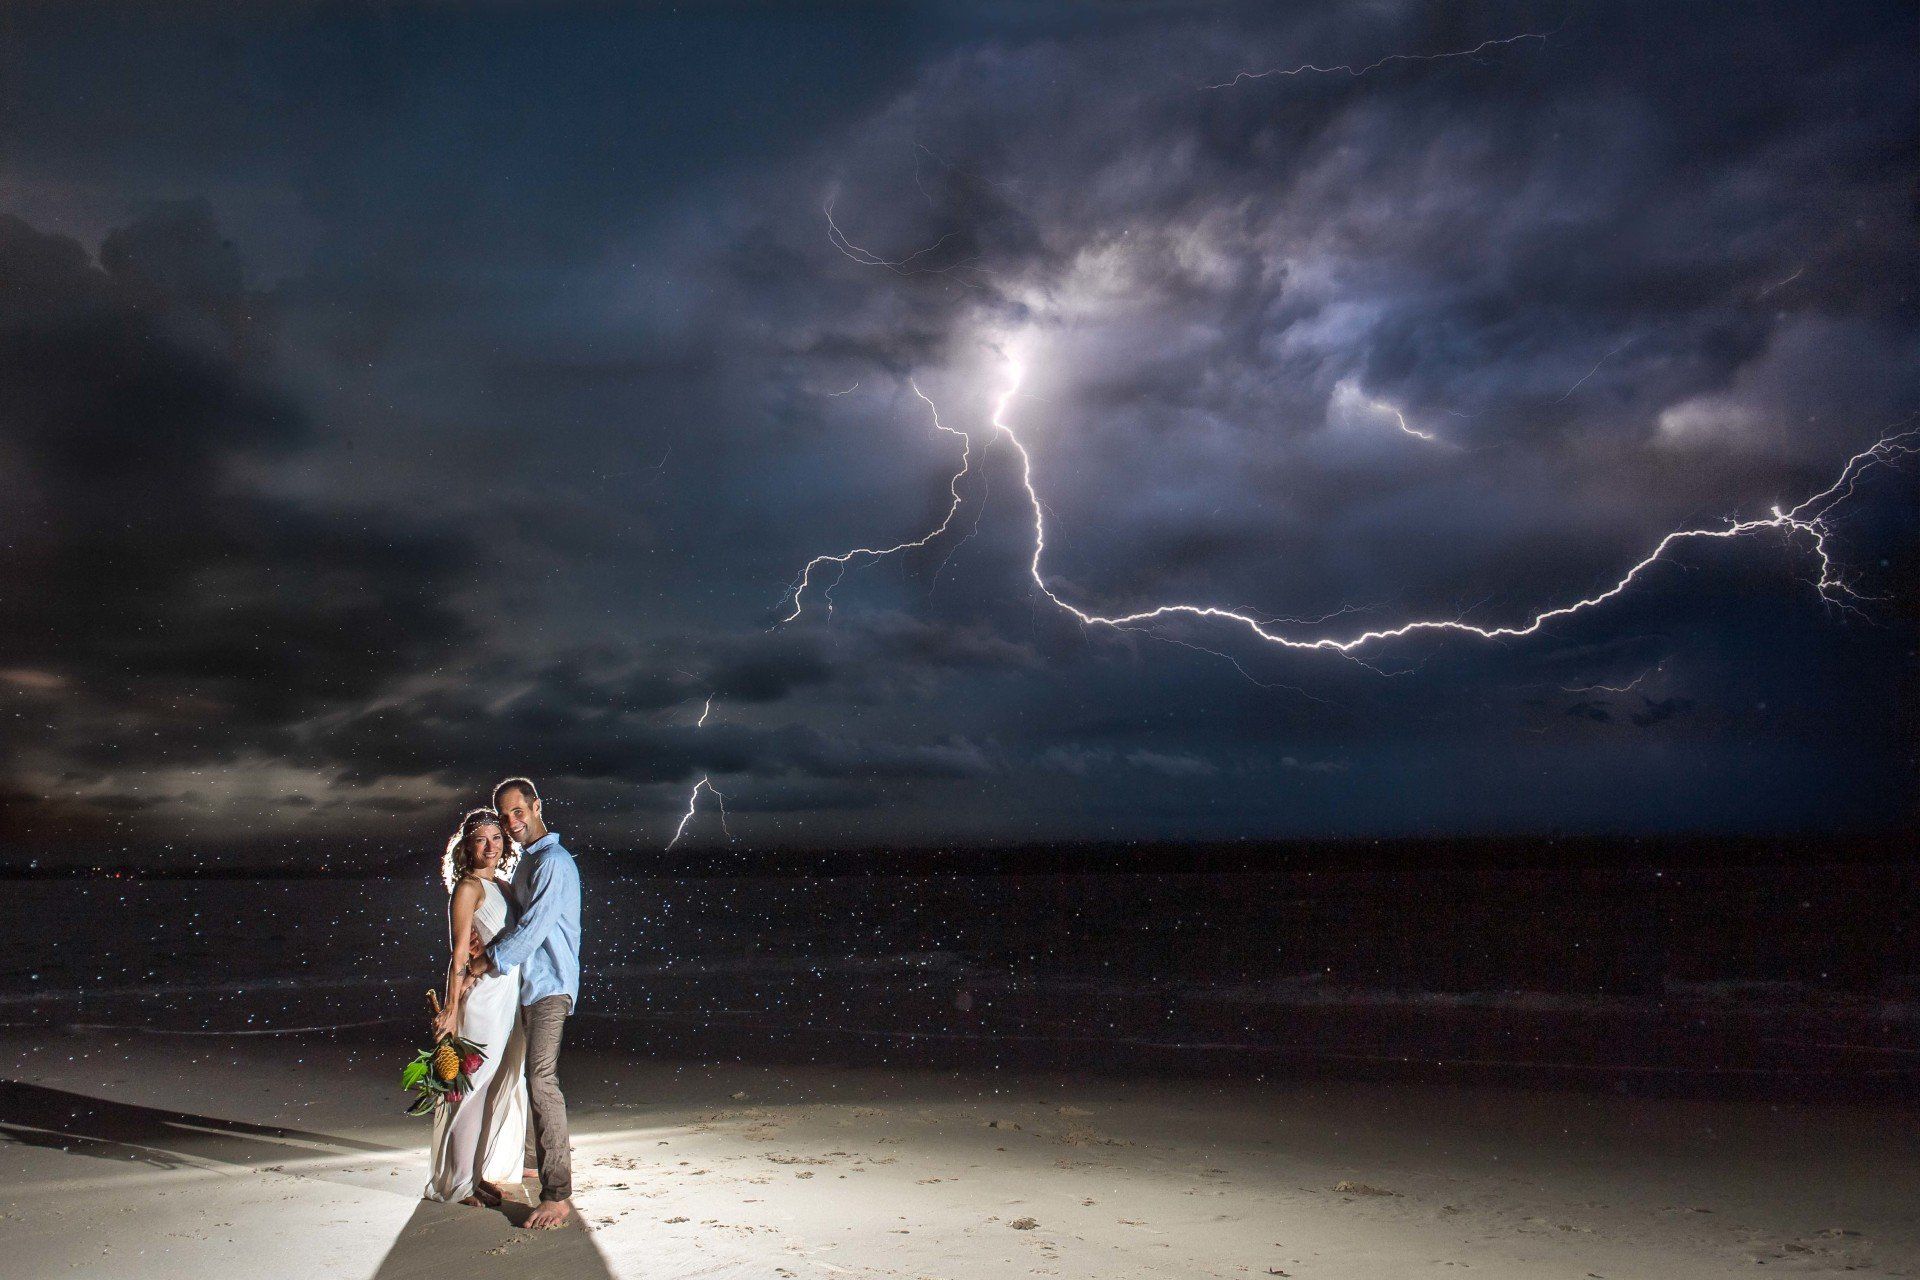 amazing lightening strike at night while just married couple are on beach embracing with flowers